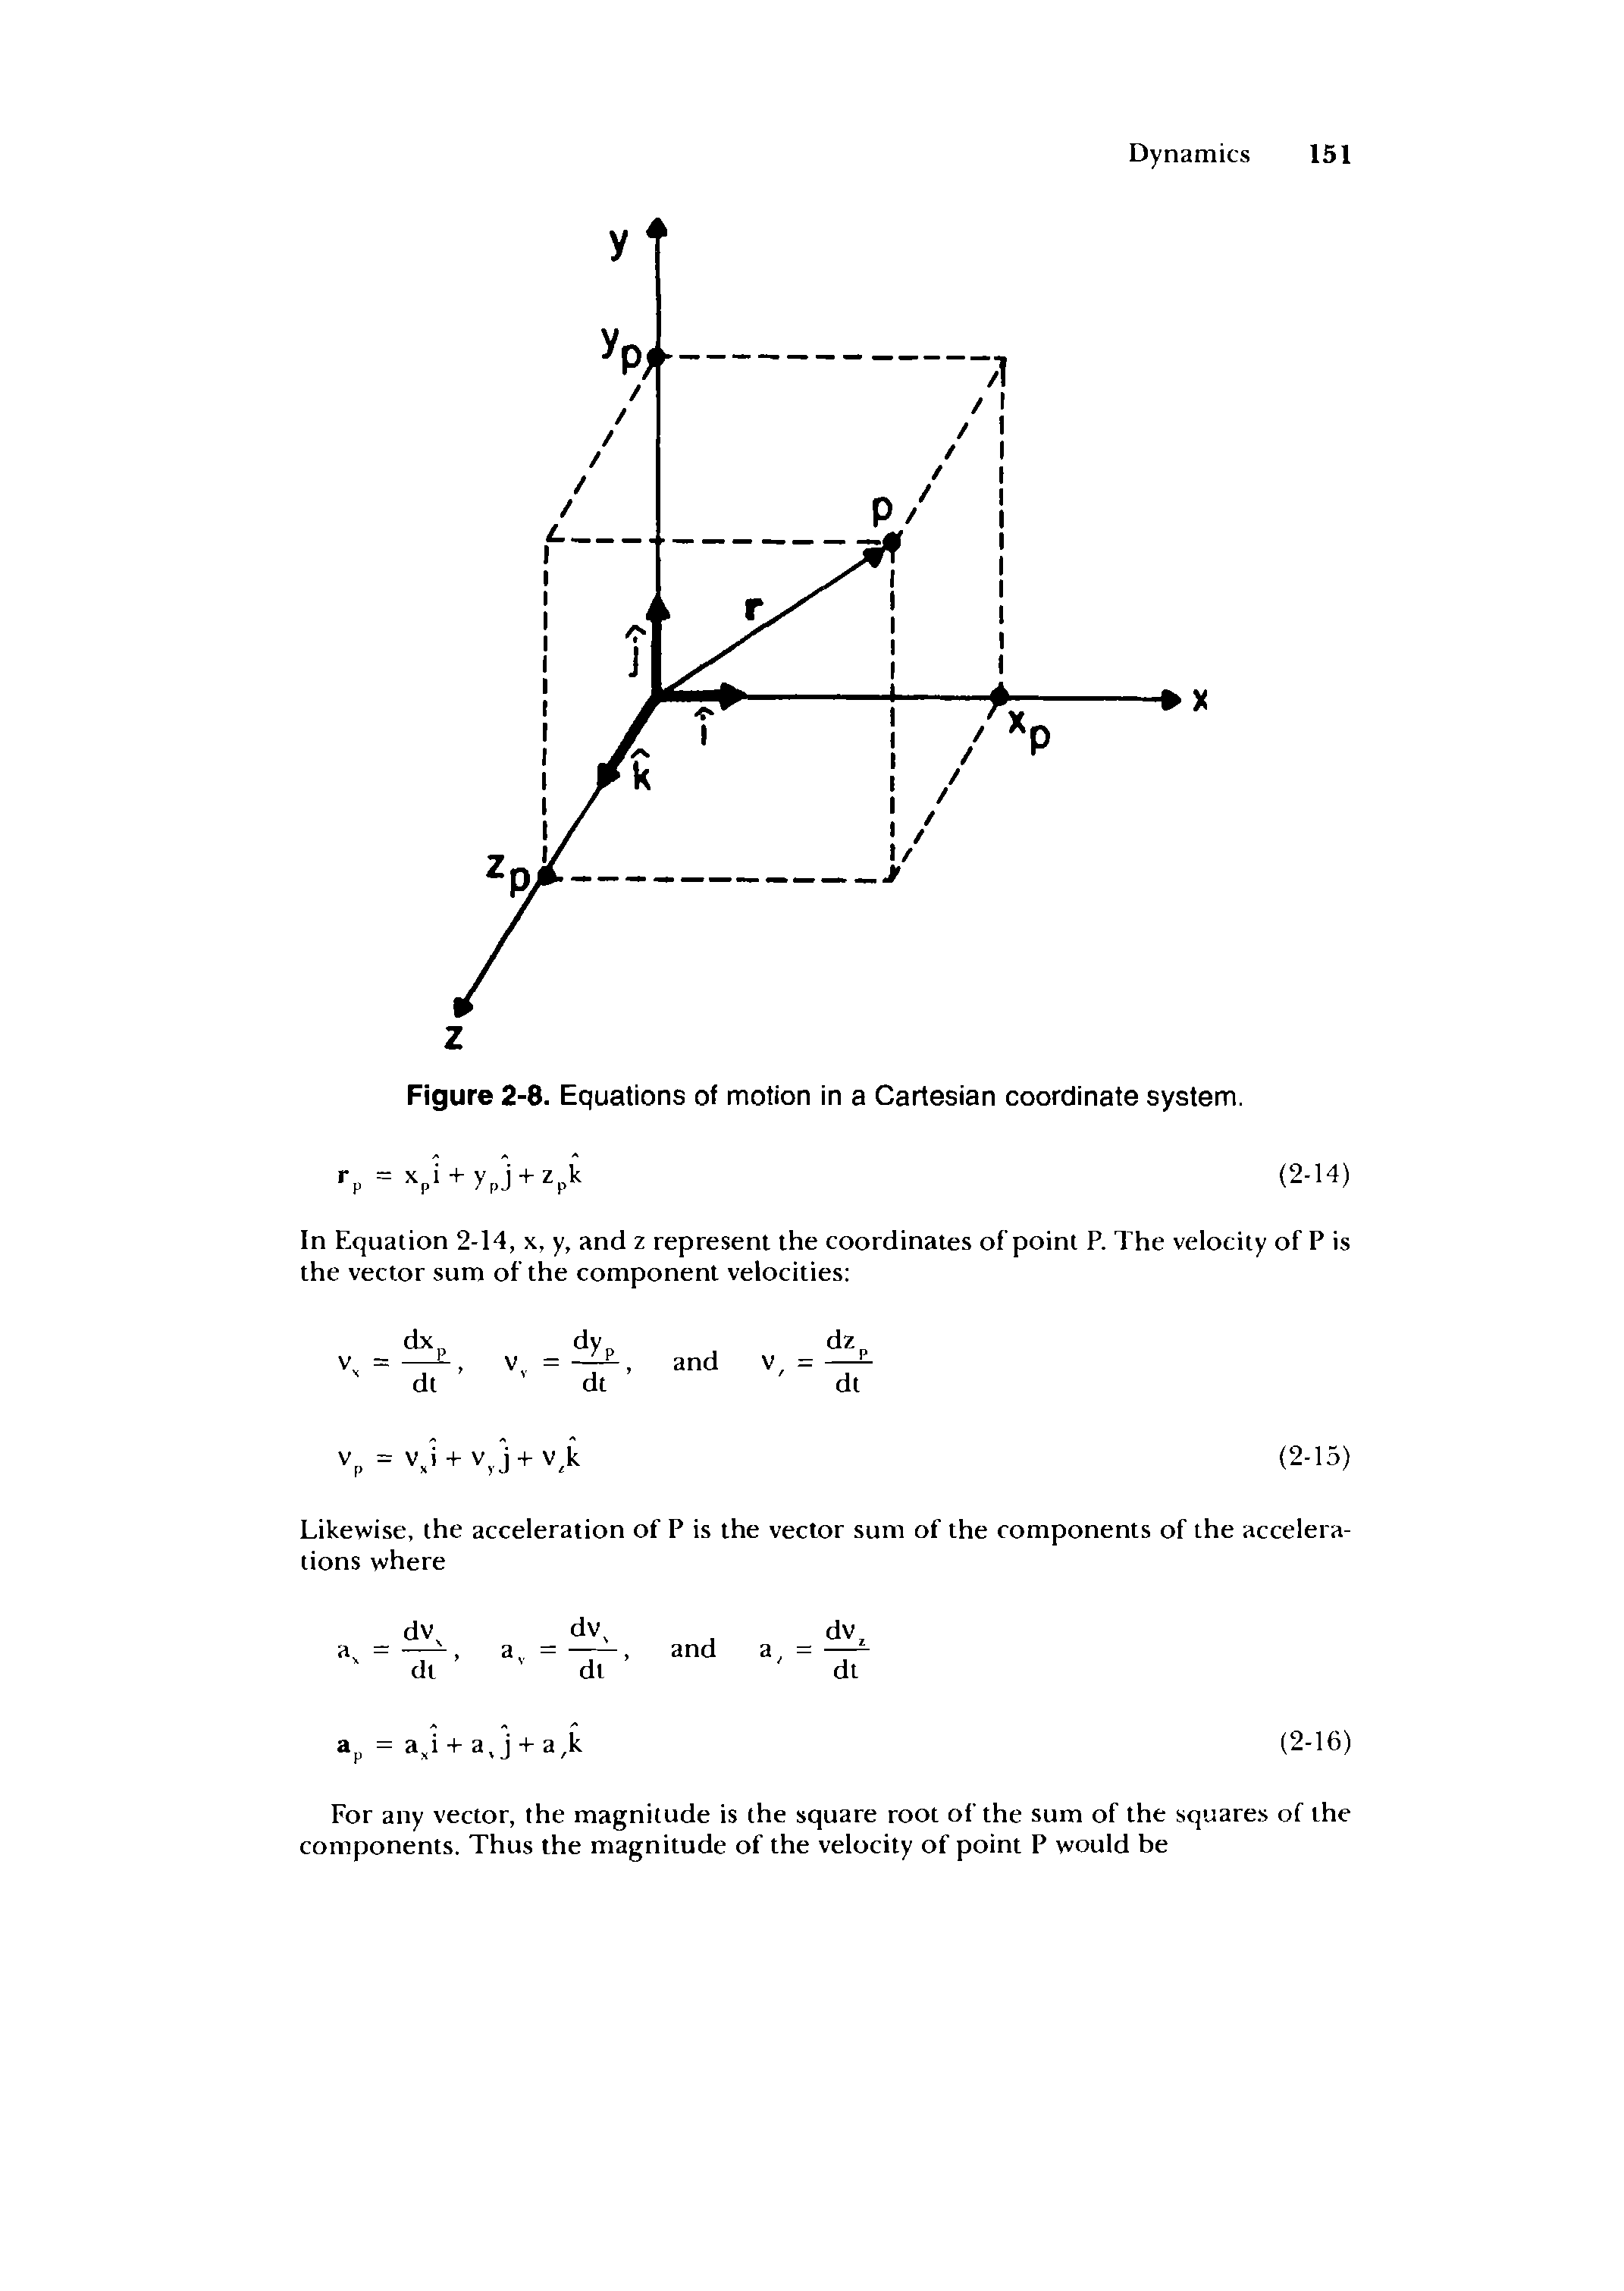 Figure 2-8. Equations of motion in a Cartesian coordinate system.